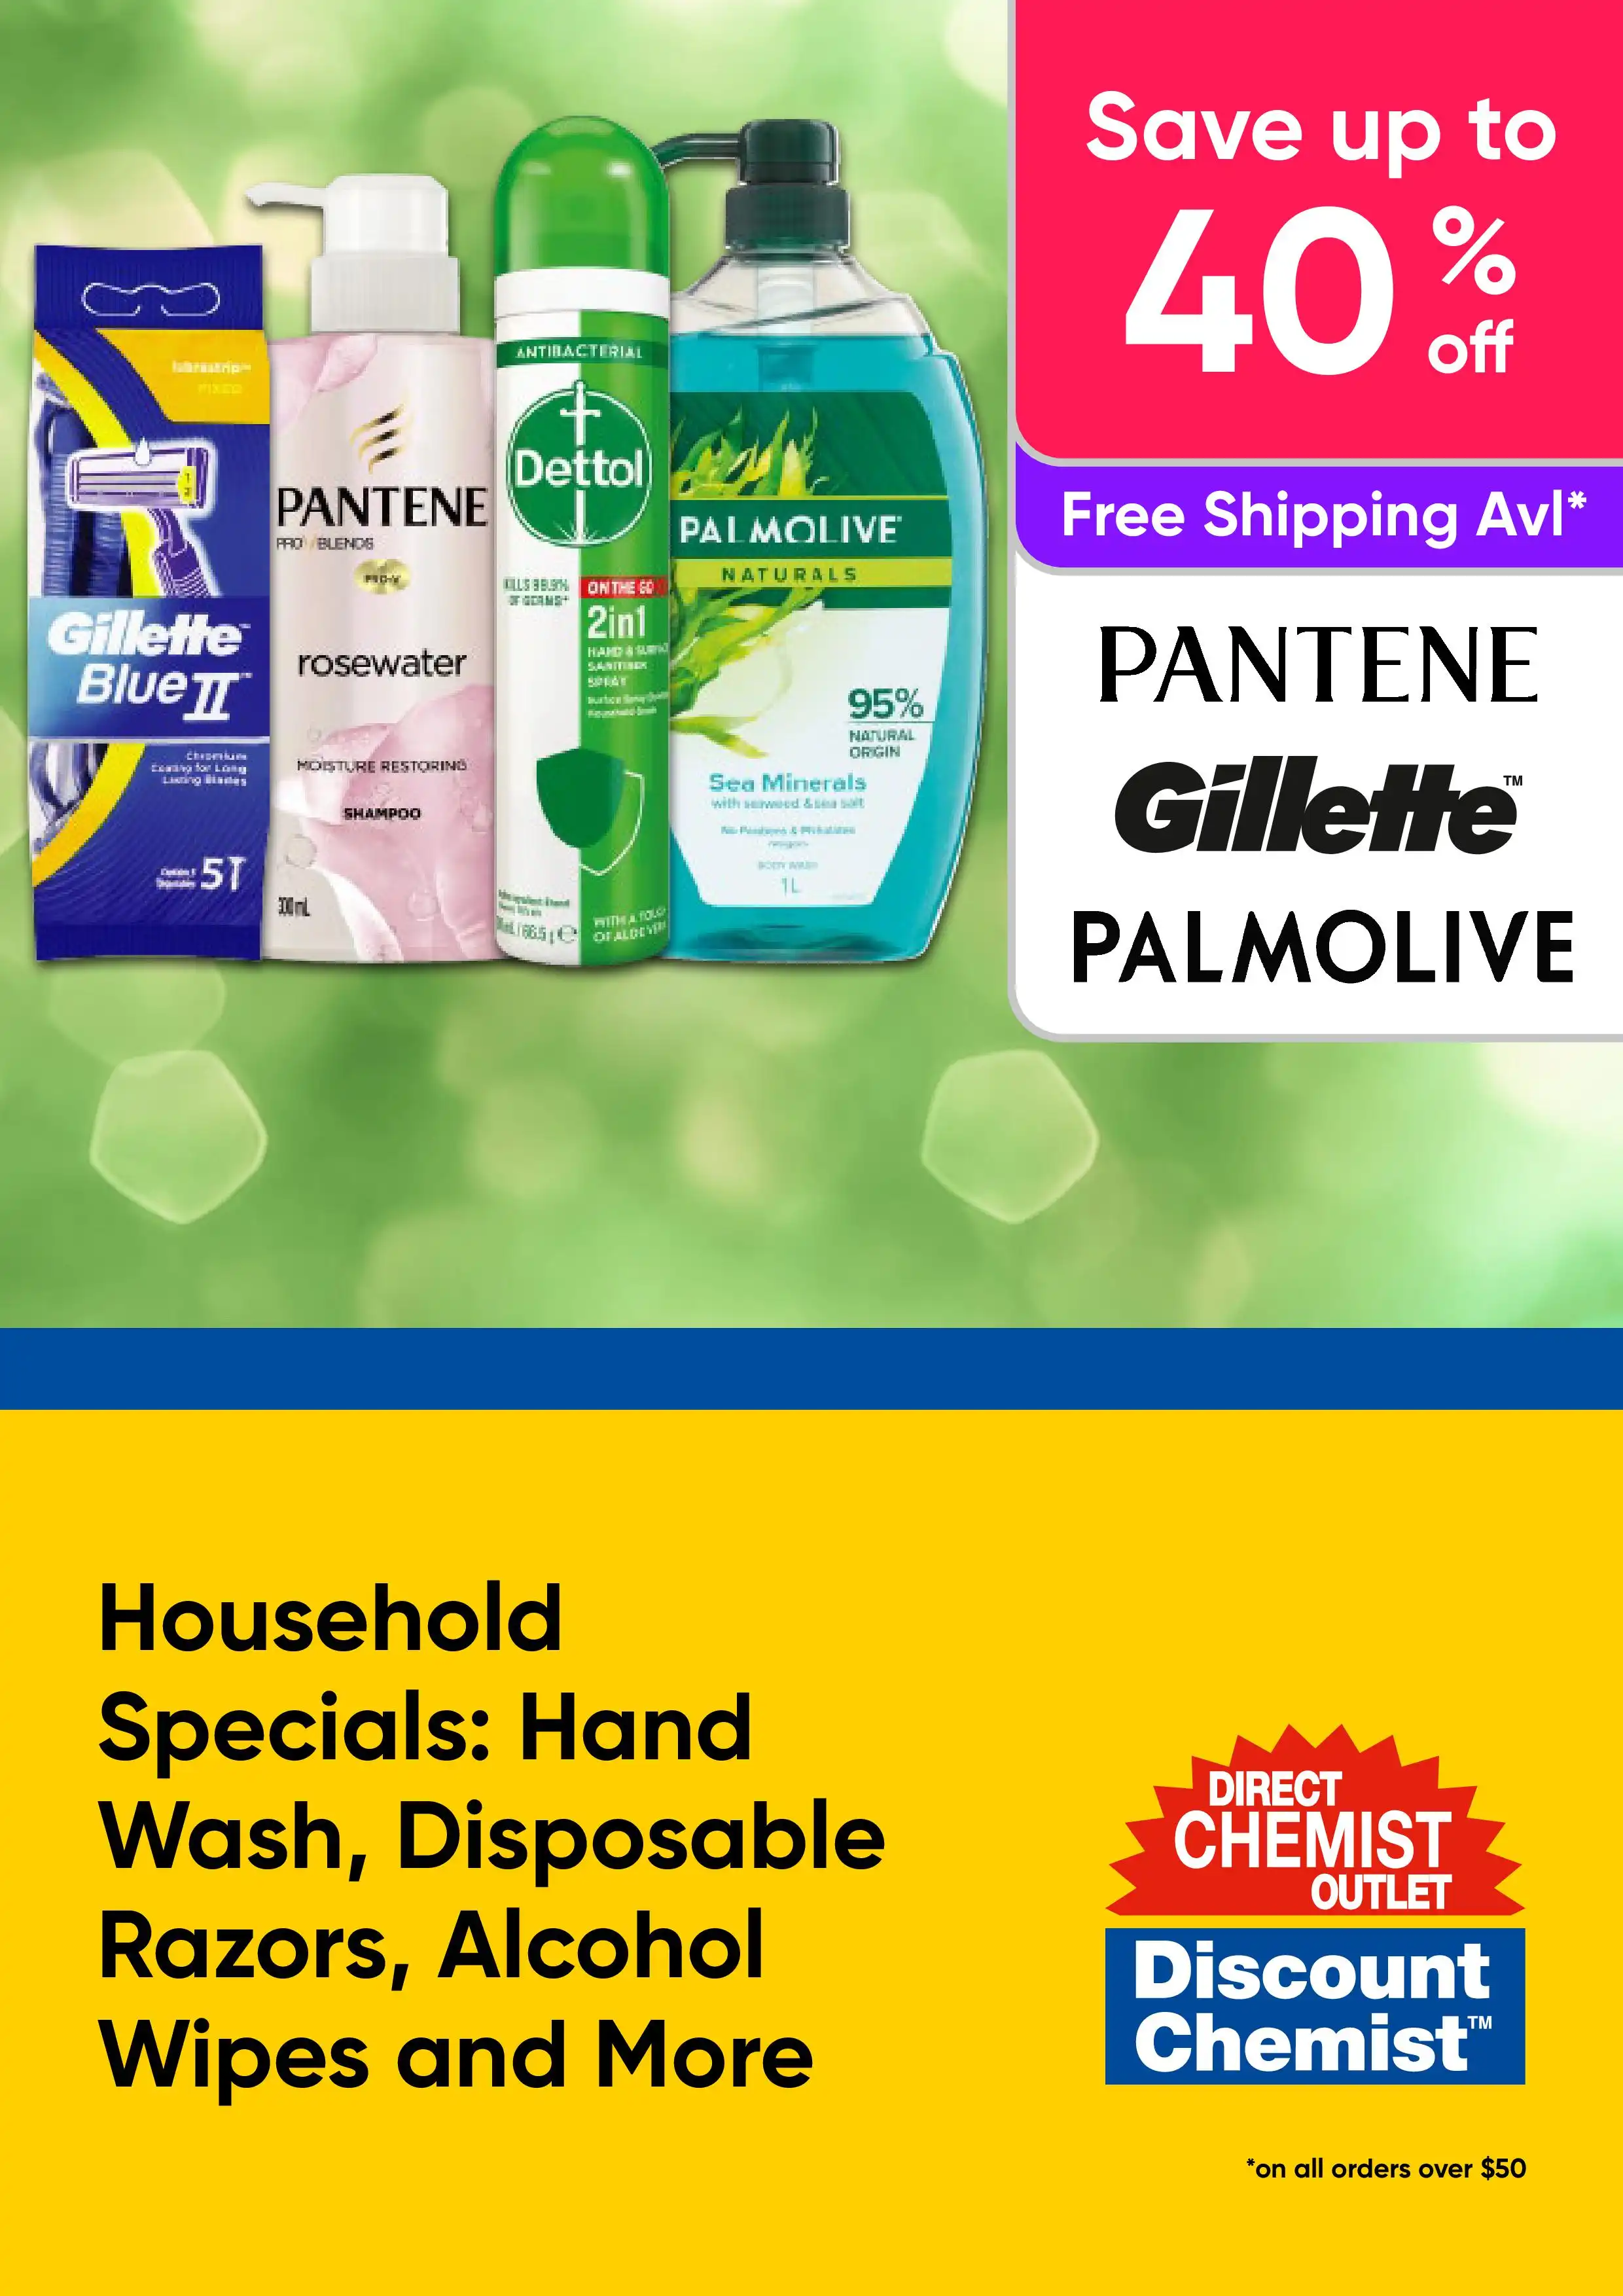 Household Specials - Hand Wash, Disposable Razors, Alcohol Wipes and More - Pantene, Gillette, Palmolive - up to 40% off